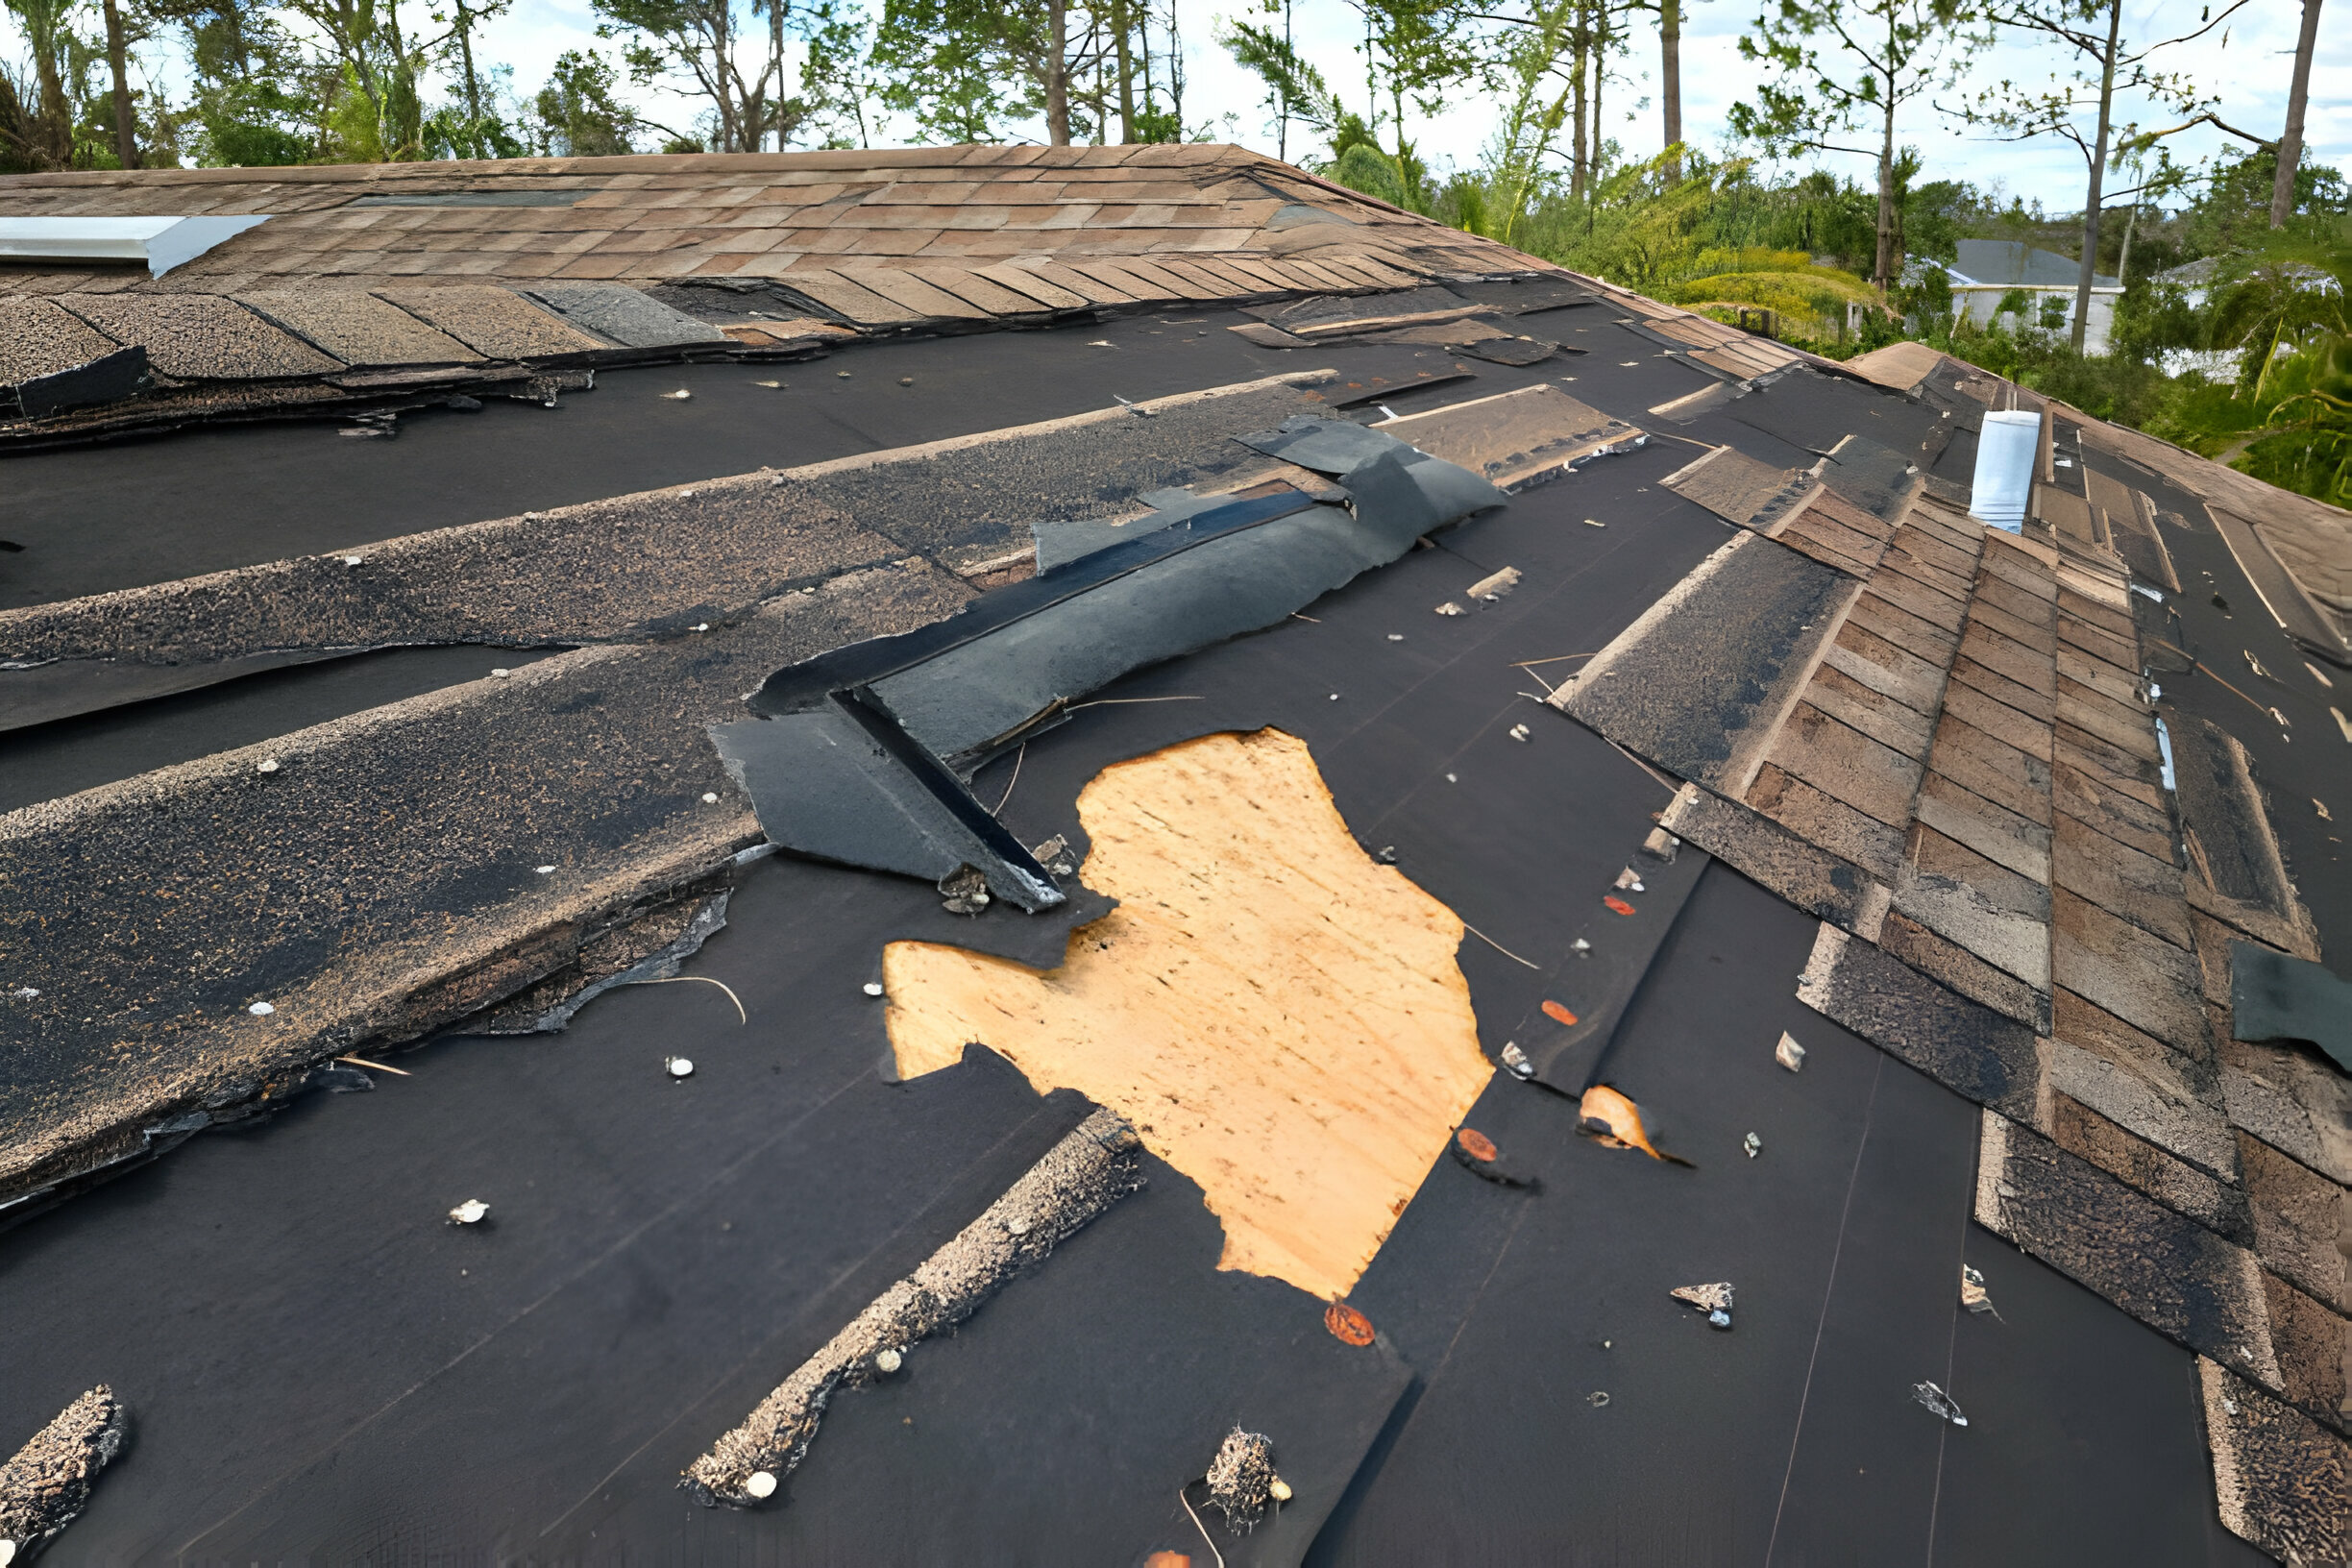 How to Protect Your Roof from Storm Damage